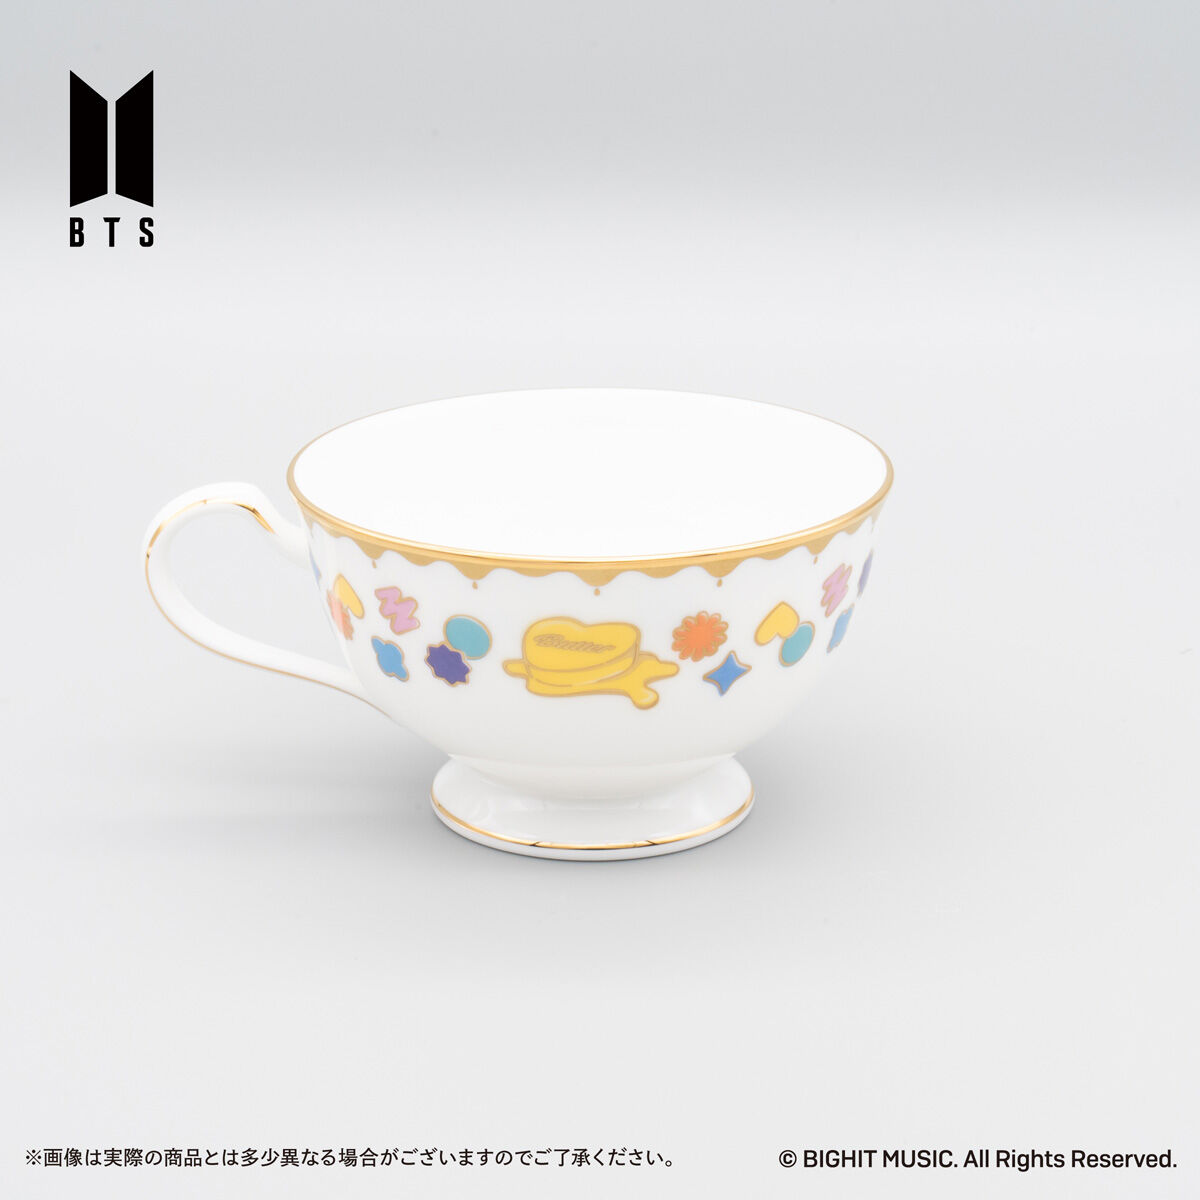 Noritake Cup＆Saucer set BTS Music Theme Boy With Luv ver 